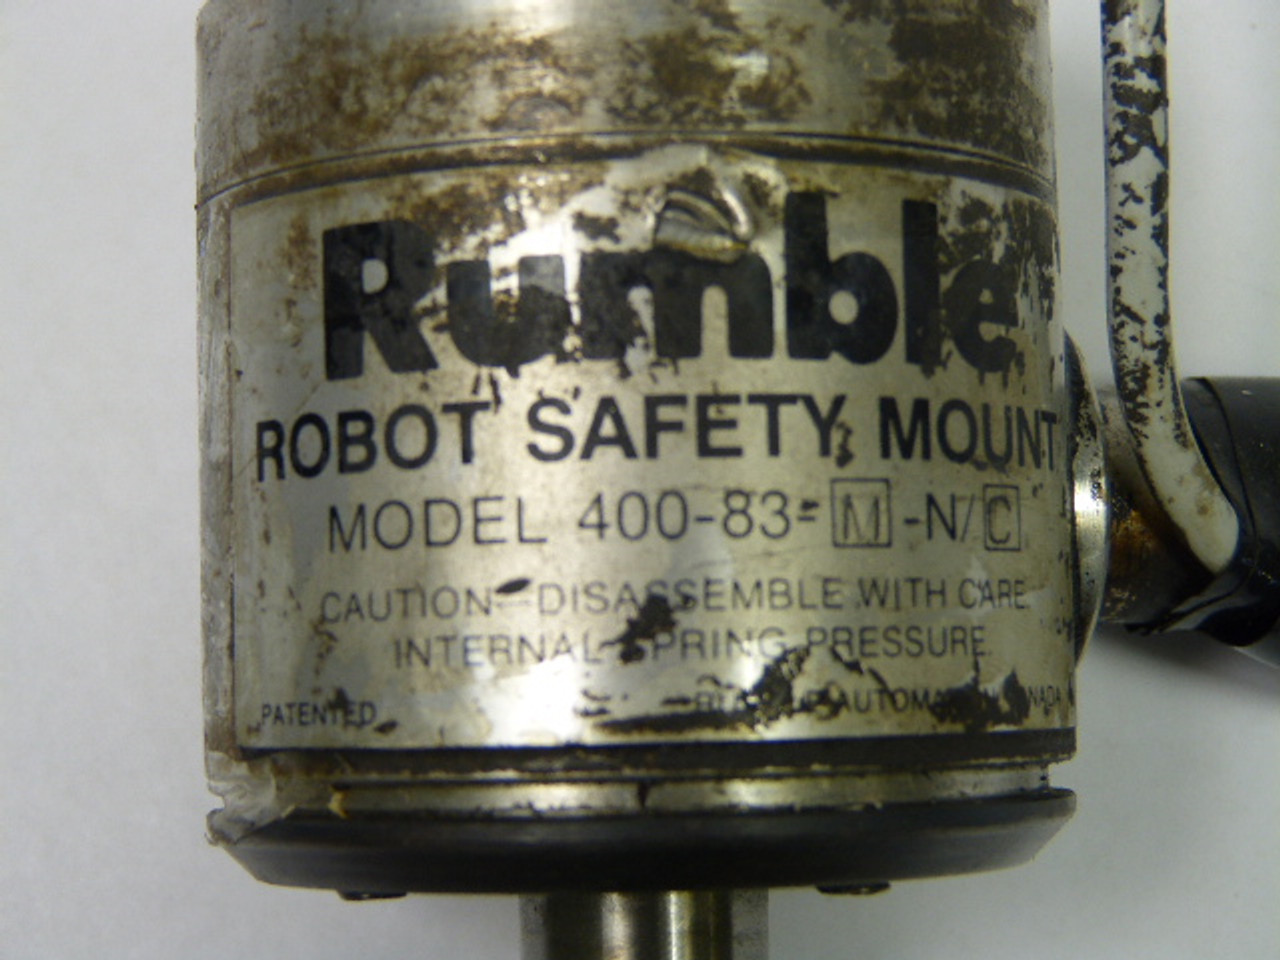 Rumble 400-83-M-N/C Robot Safety Mount USED